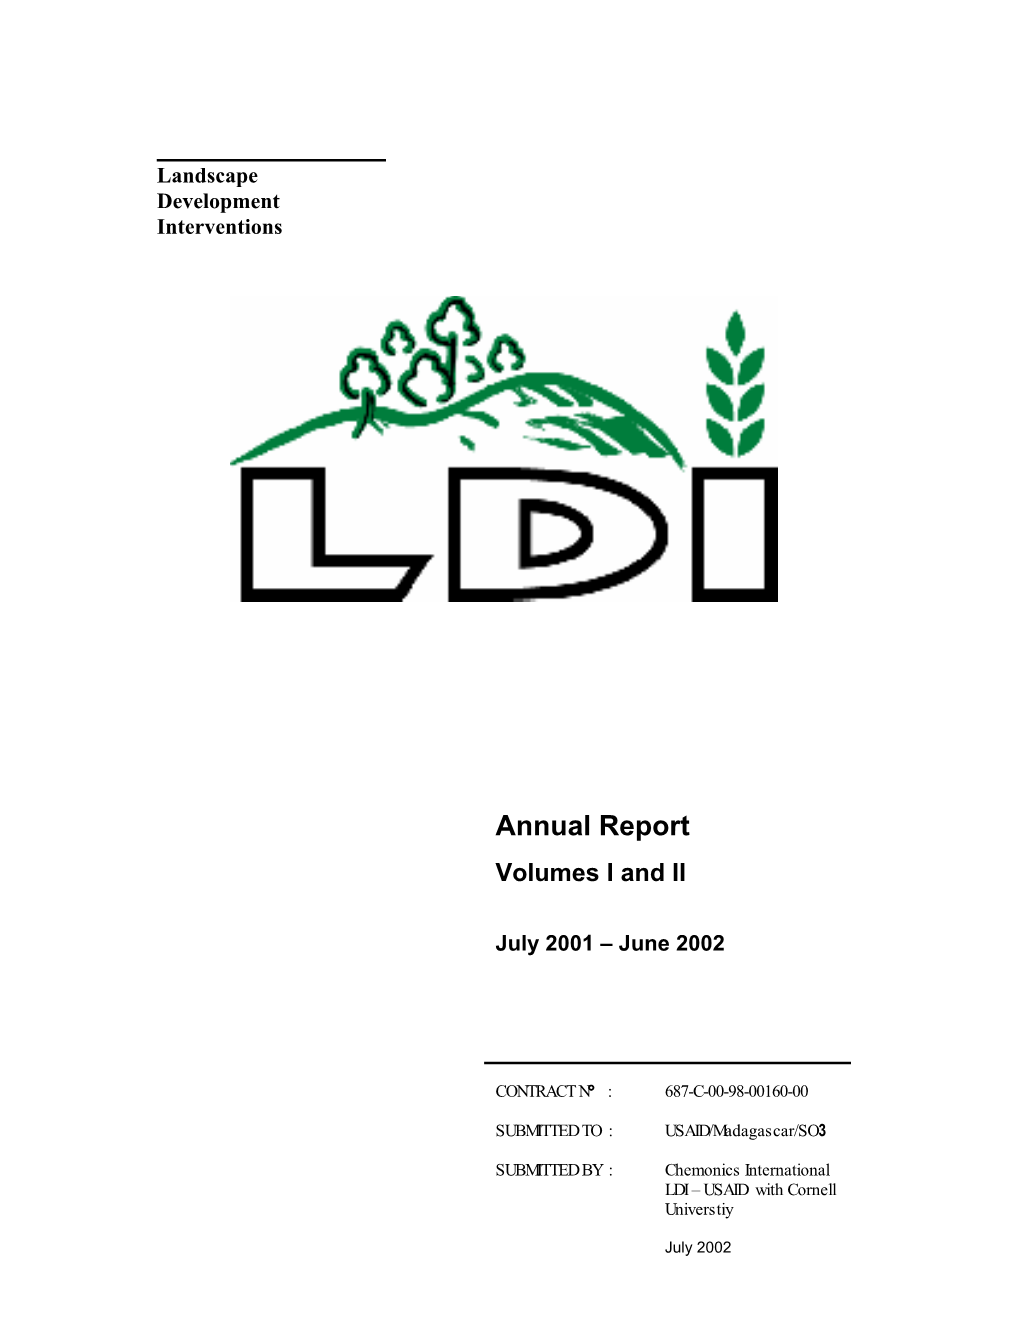 Annual Report Volumes I and II